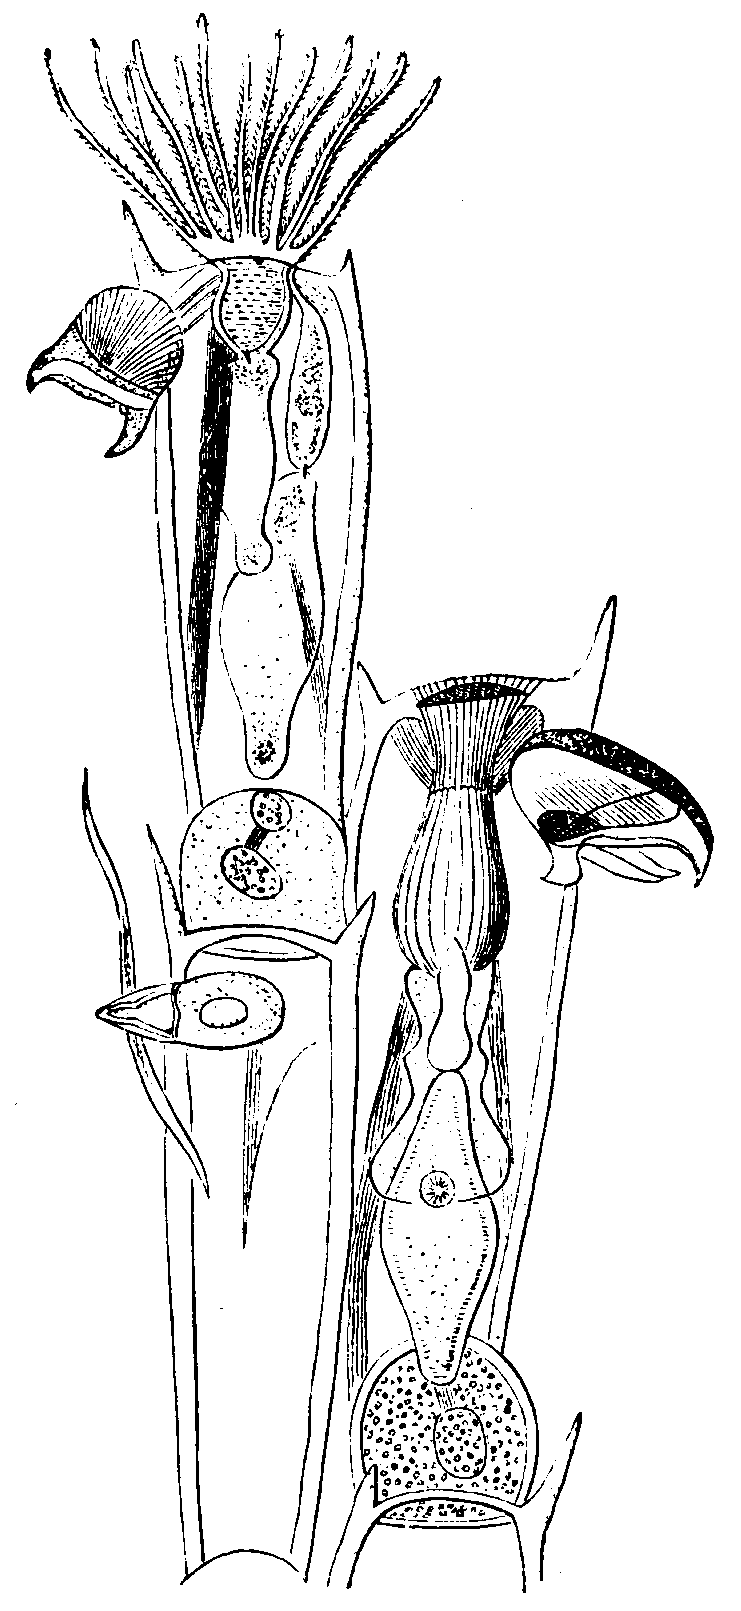 A polyzoon with bird's-head processes.